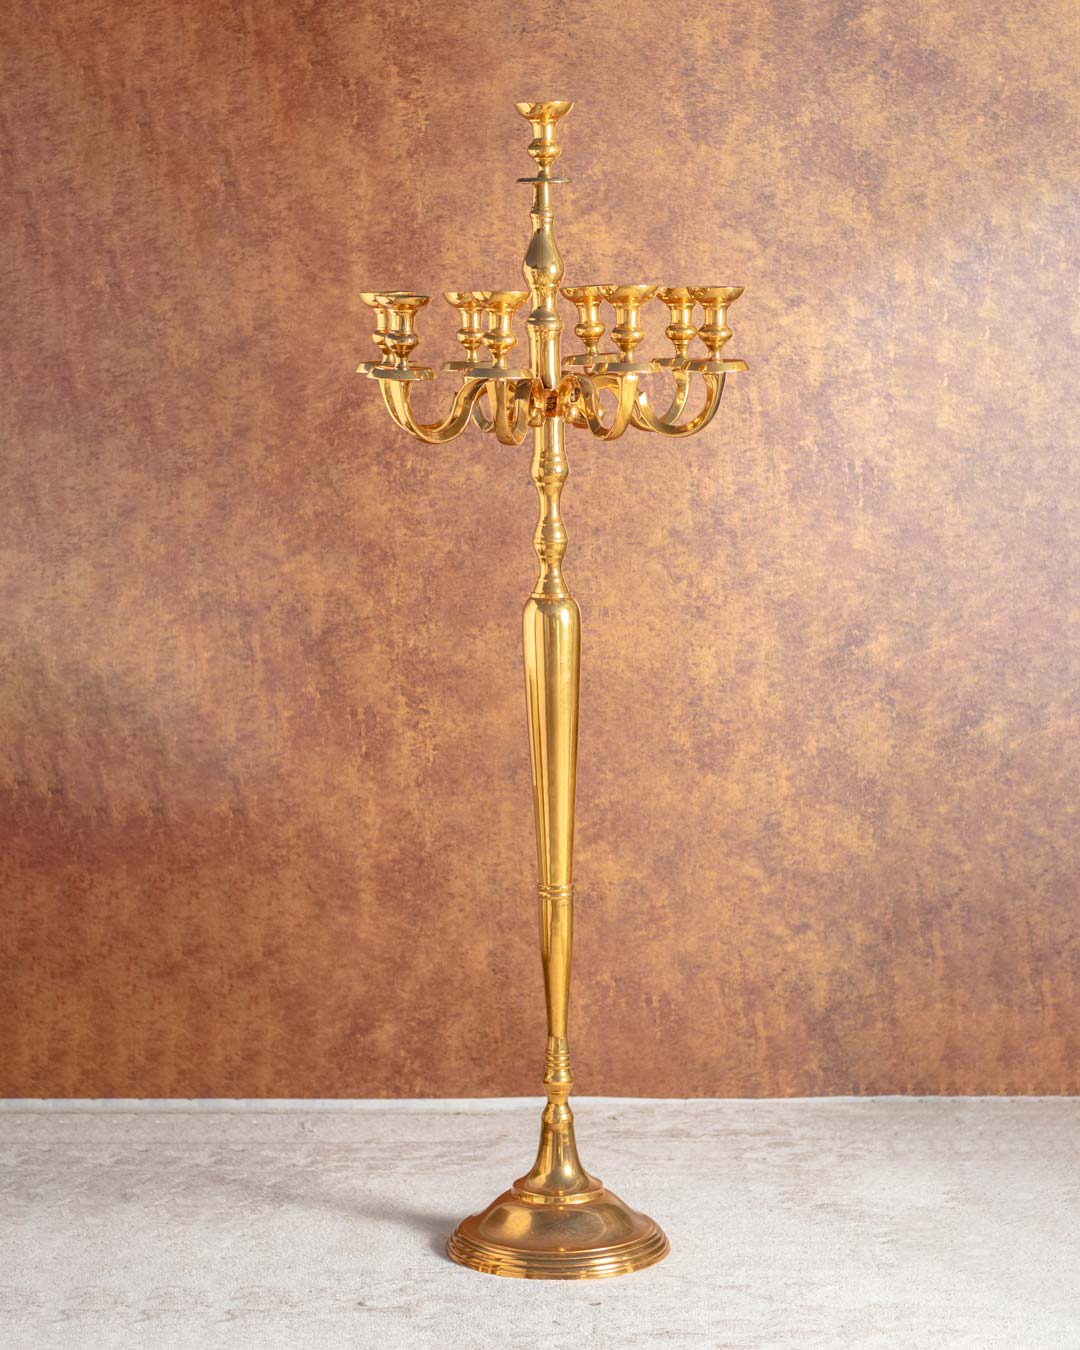 Spiritual Floor Candle Stand With 9 Branches - 42"